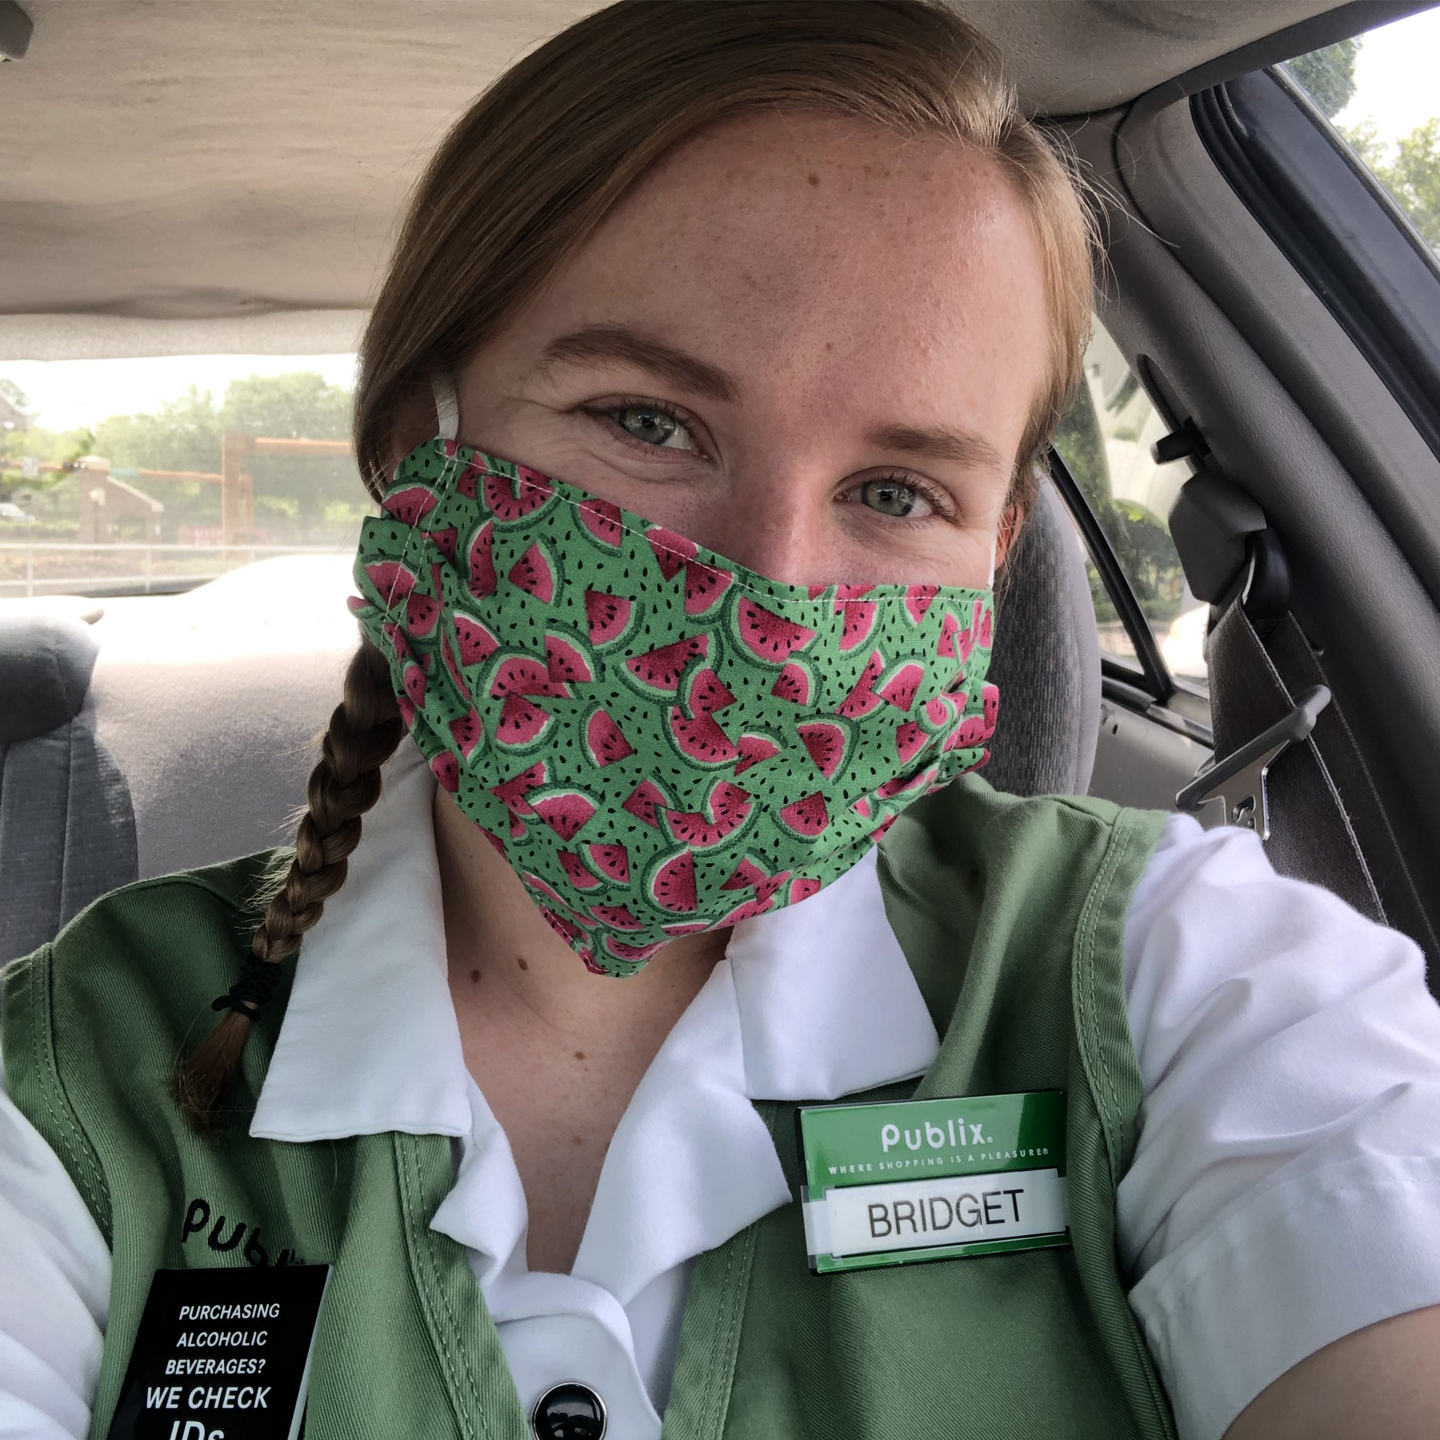 A photo of Bridget Duignan wearing a green mask with watermelons on, in a Publix uniform